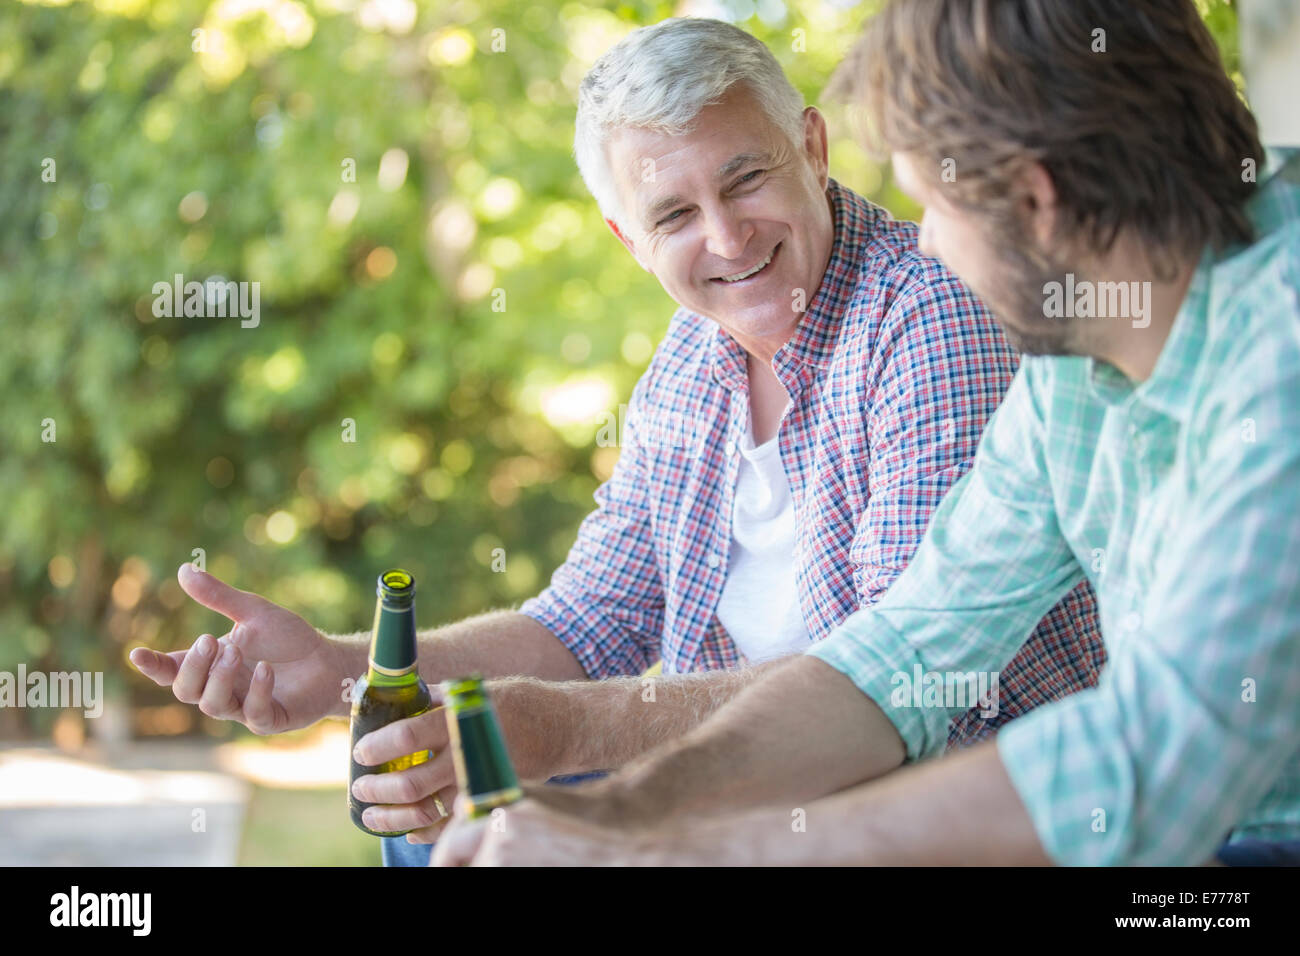 Father and son drinking outdoors Stock Photo